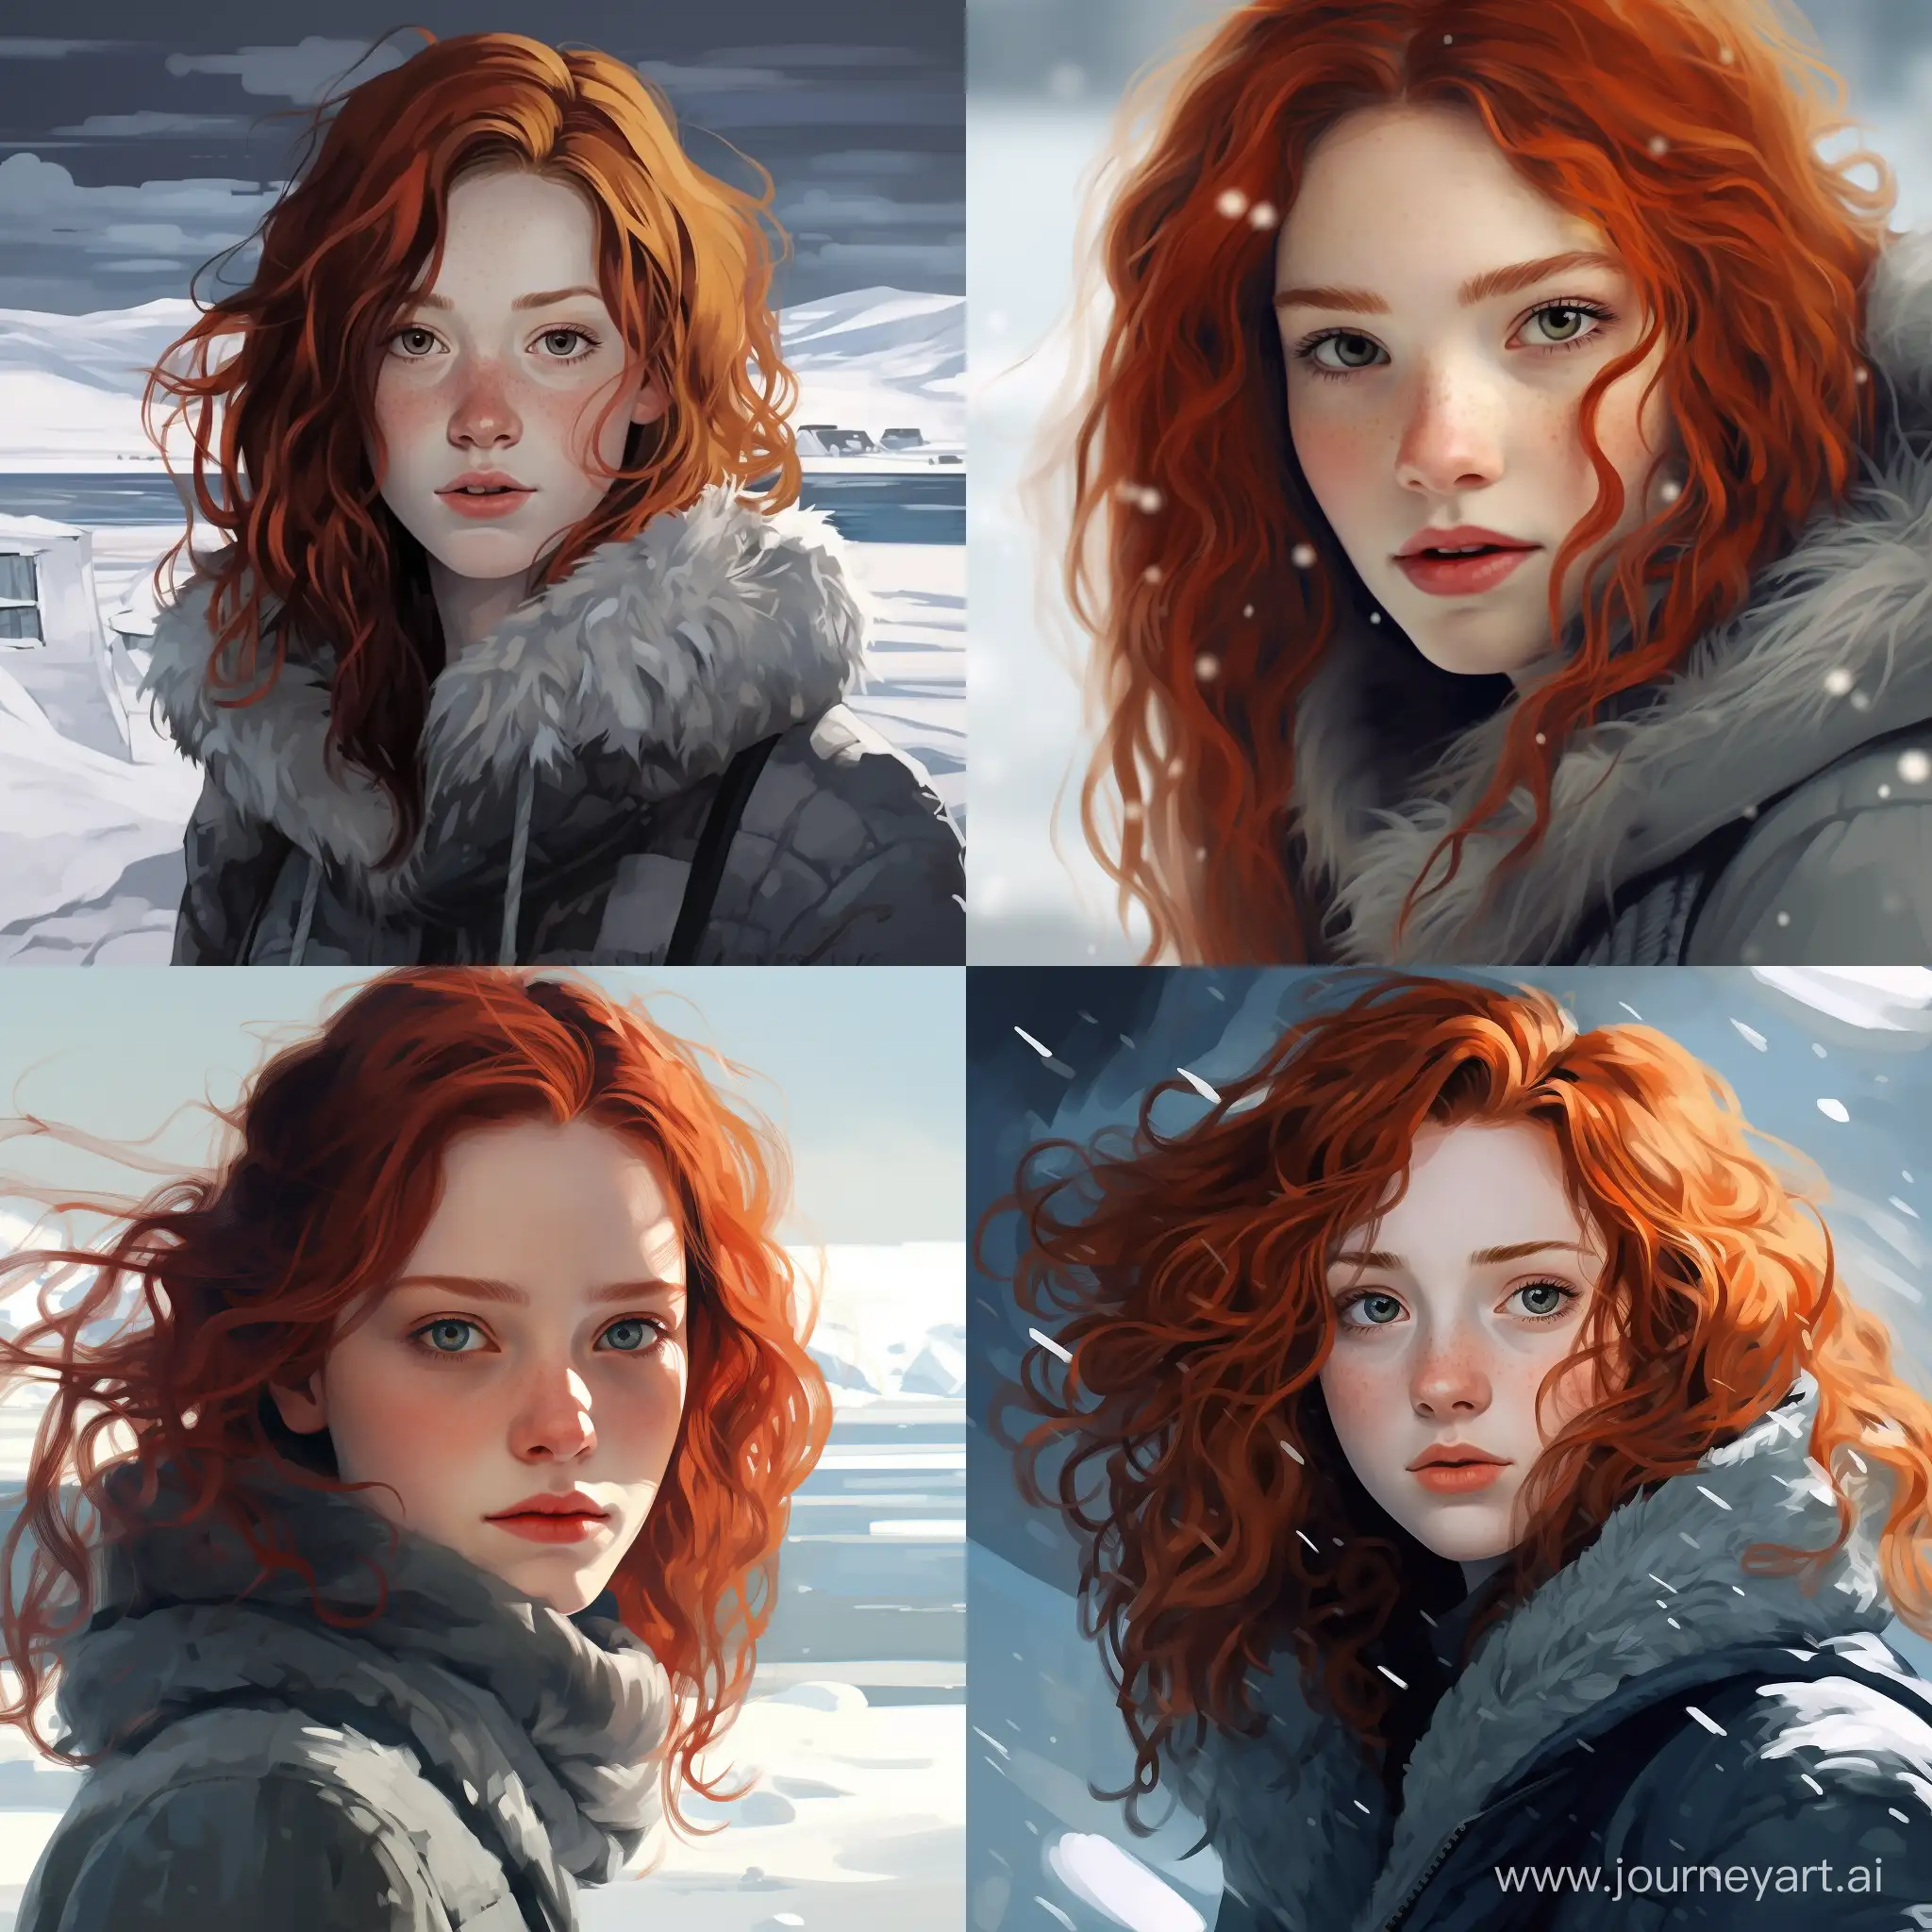 Beautiful girl, curly dark red hair, gray eyes, freckles, pale skin, teenager, 15 years old, soaked through, ocean, winter, in the ice of Antarctica, high quality, high detail, cartoon art